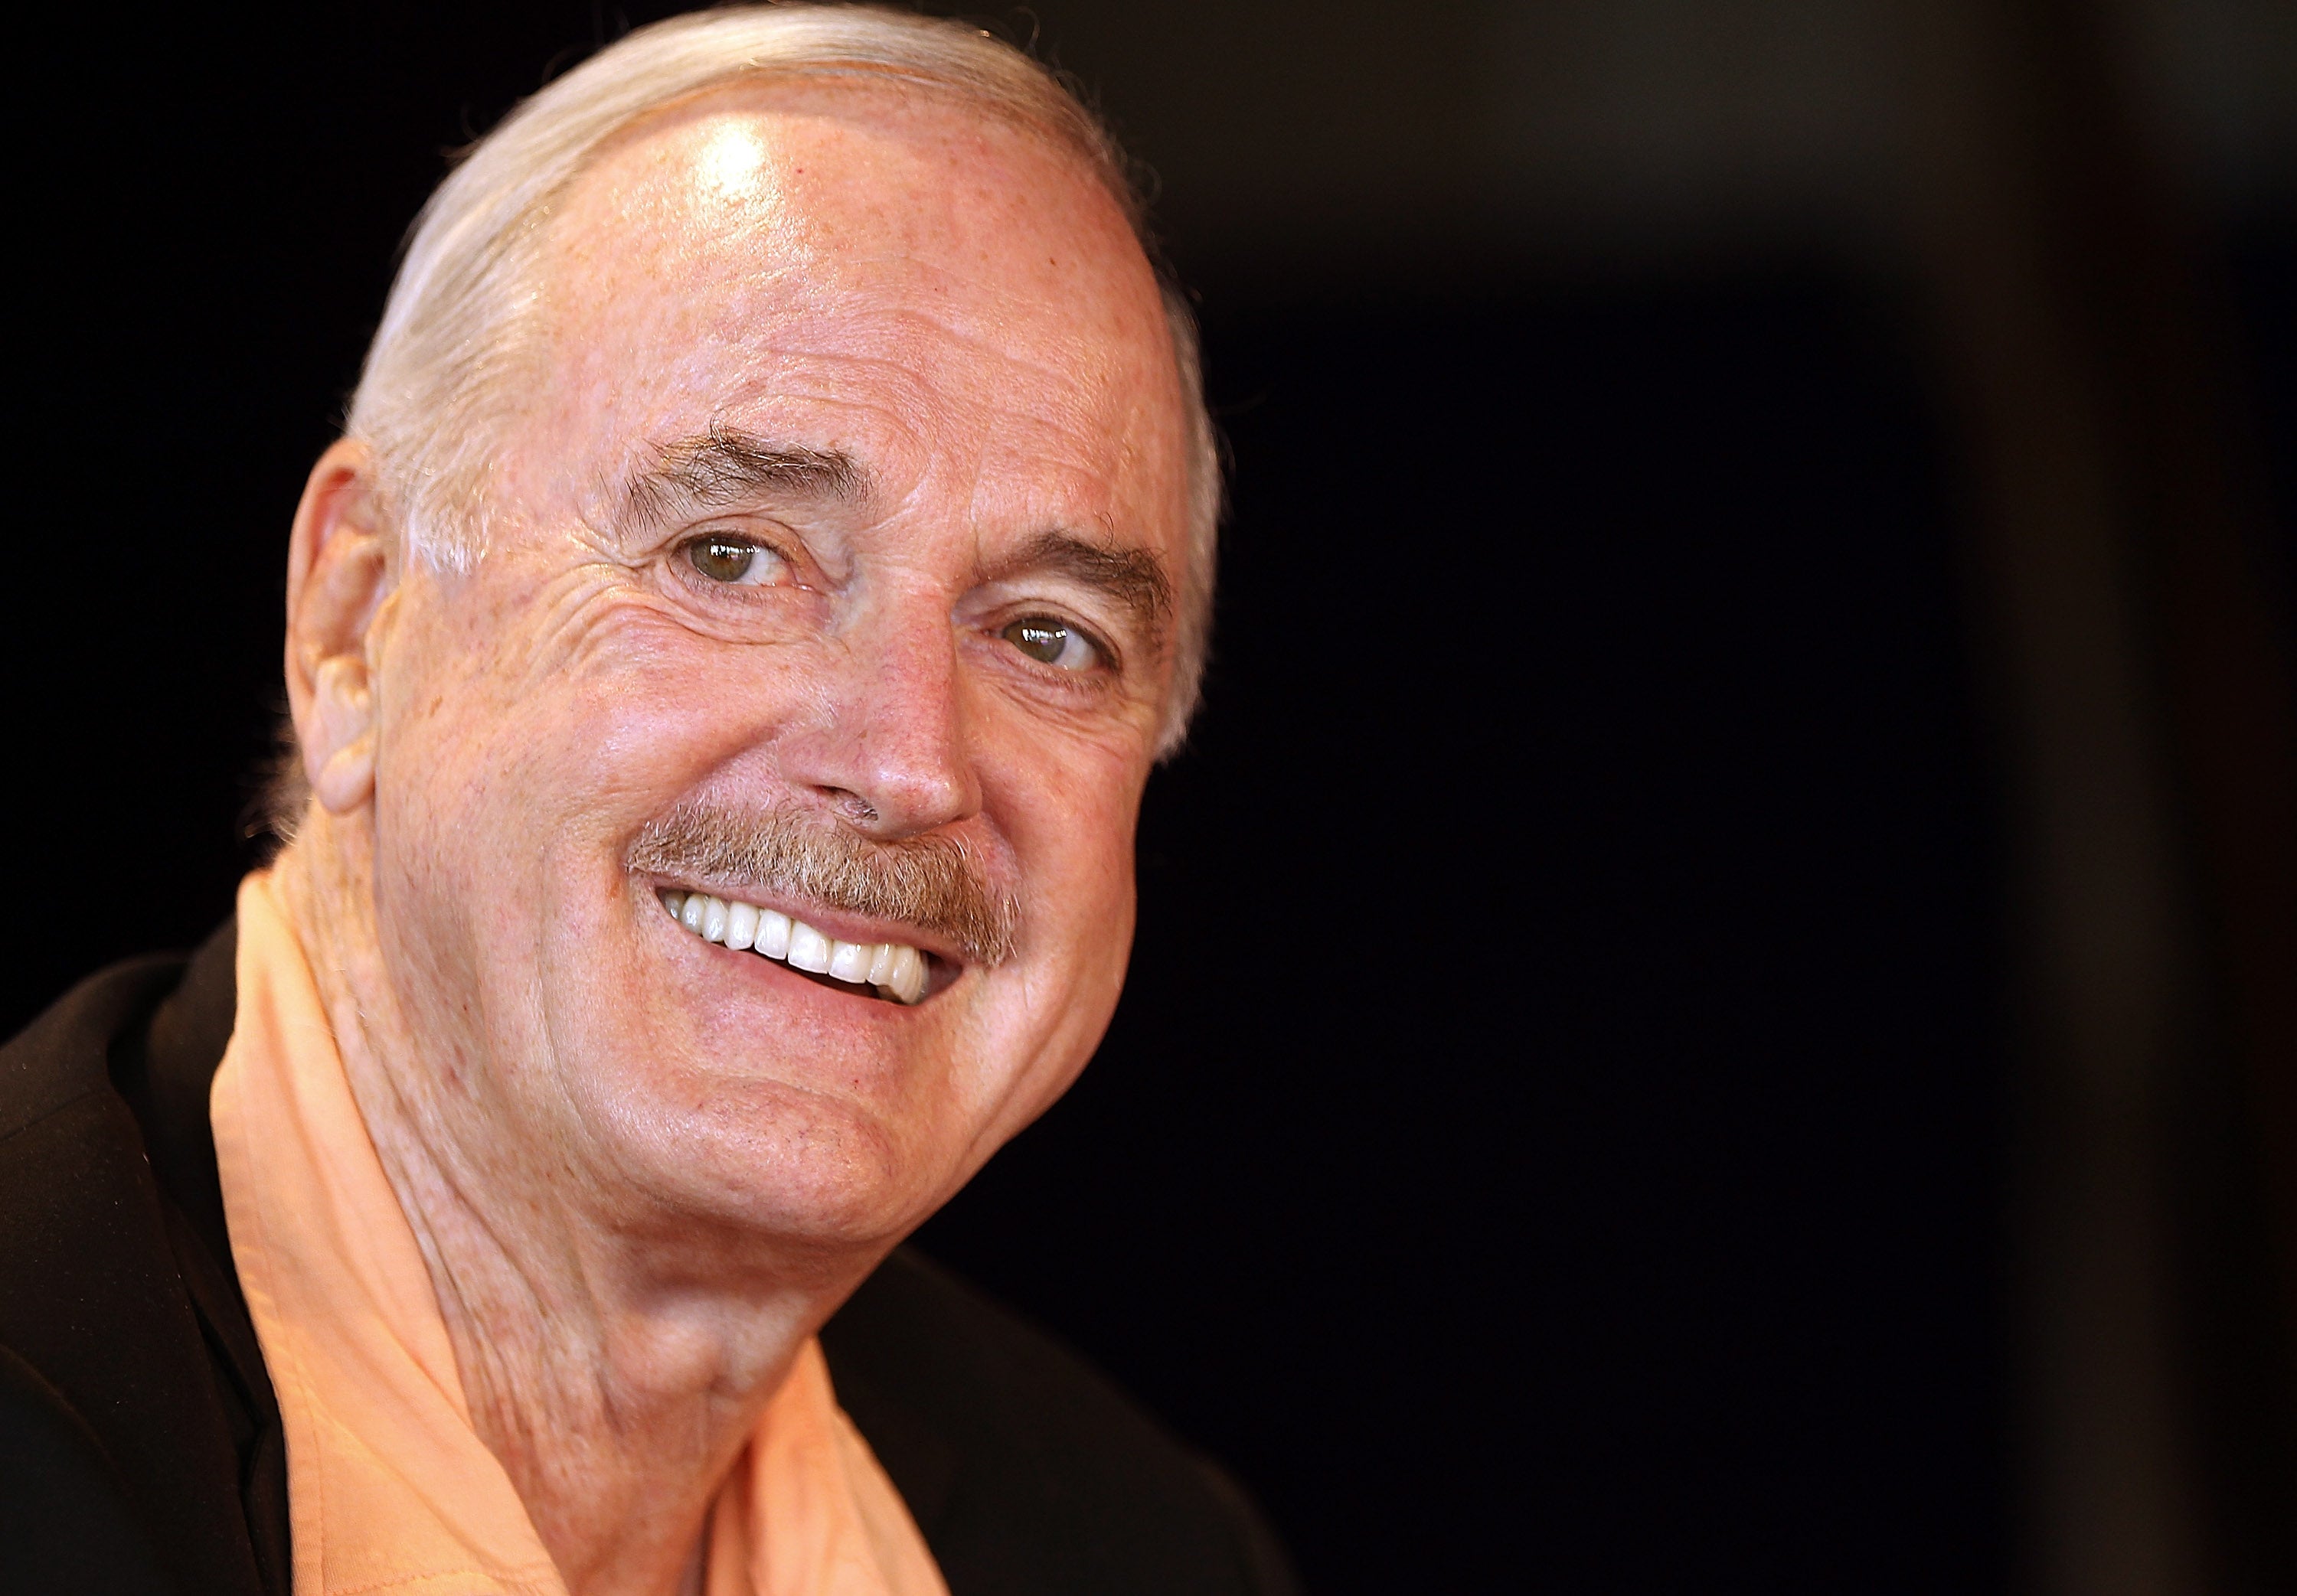 John Cleese and Piers Morgan have had a well-publicised Twitter spat